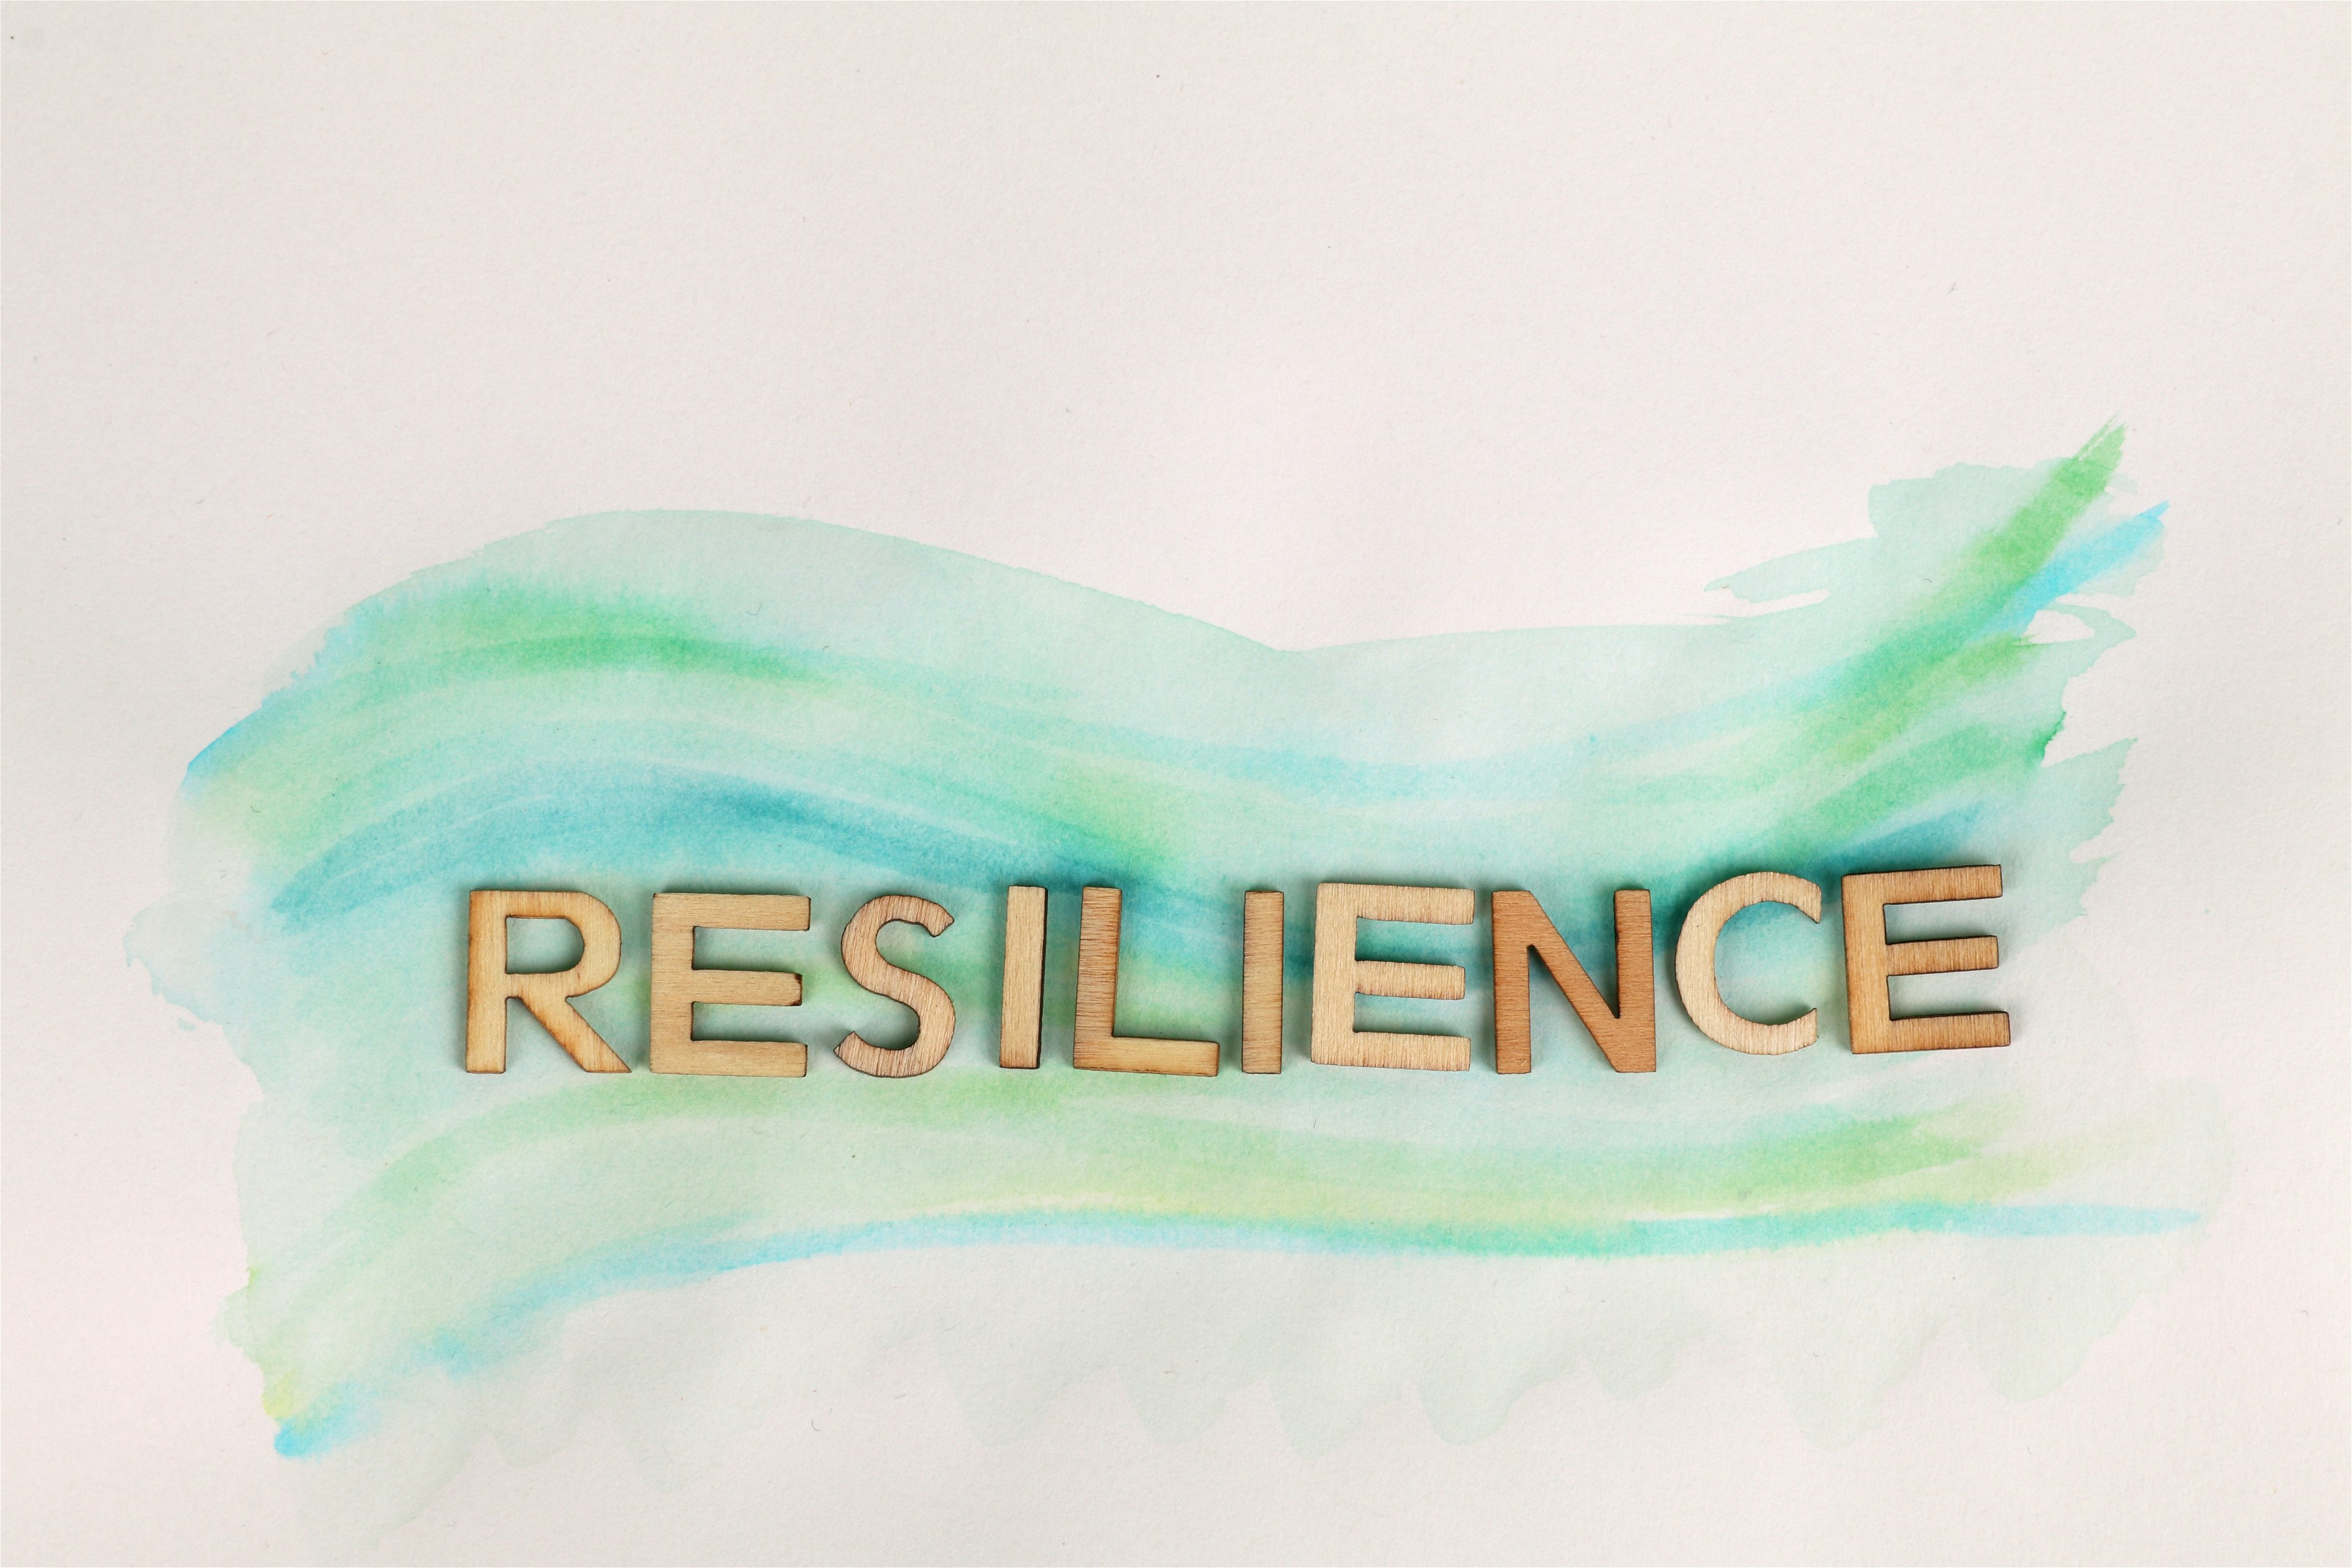 Resilience: The 5 pillars of personal resilience